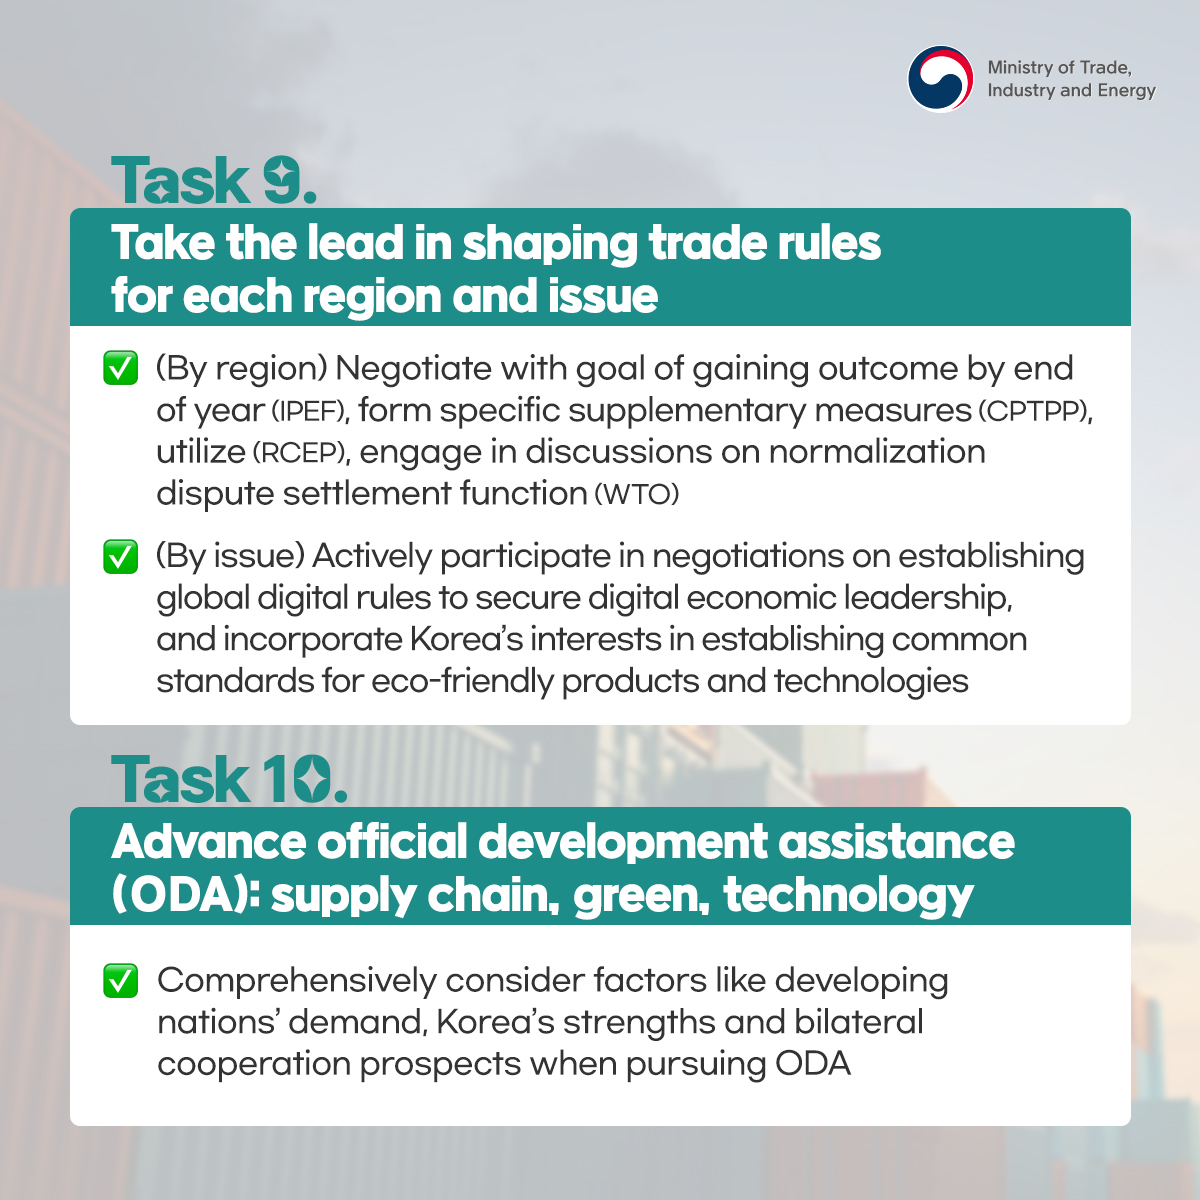 MOTIE announces 10 major tasks for export & investment growth in 2023 Image 6